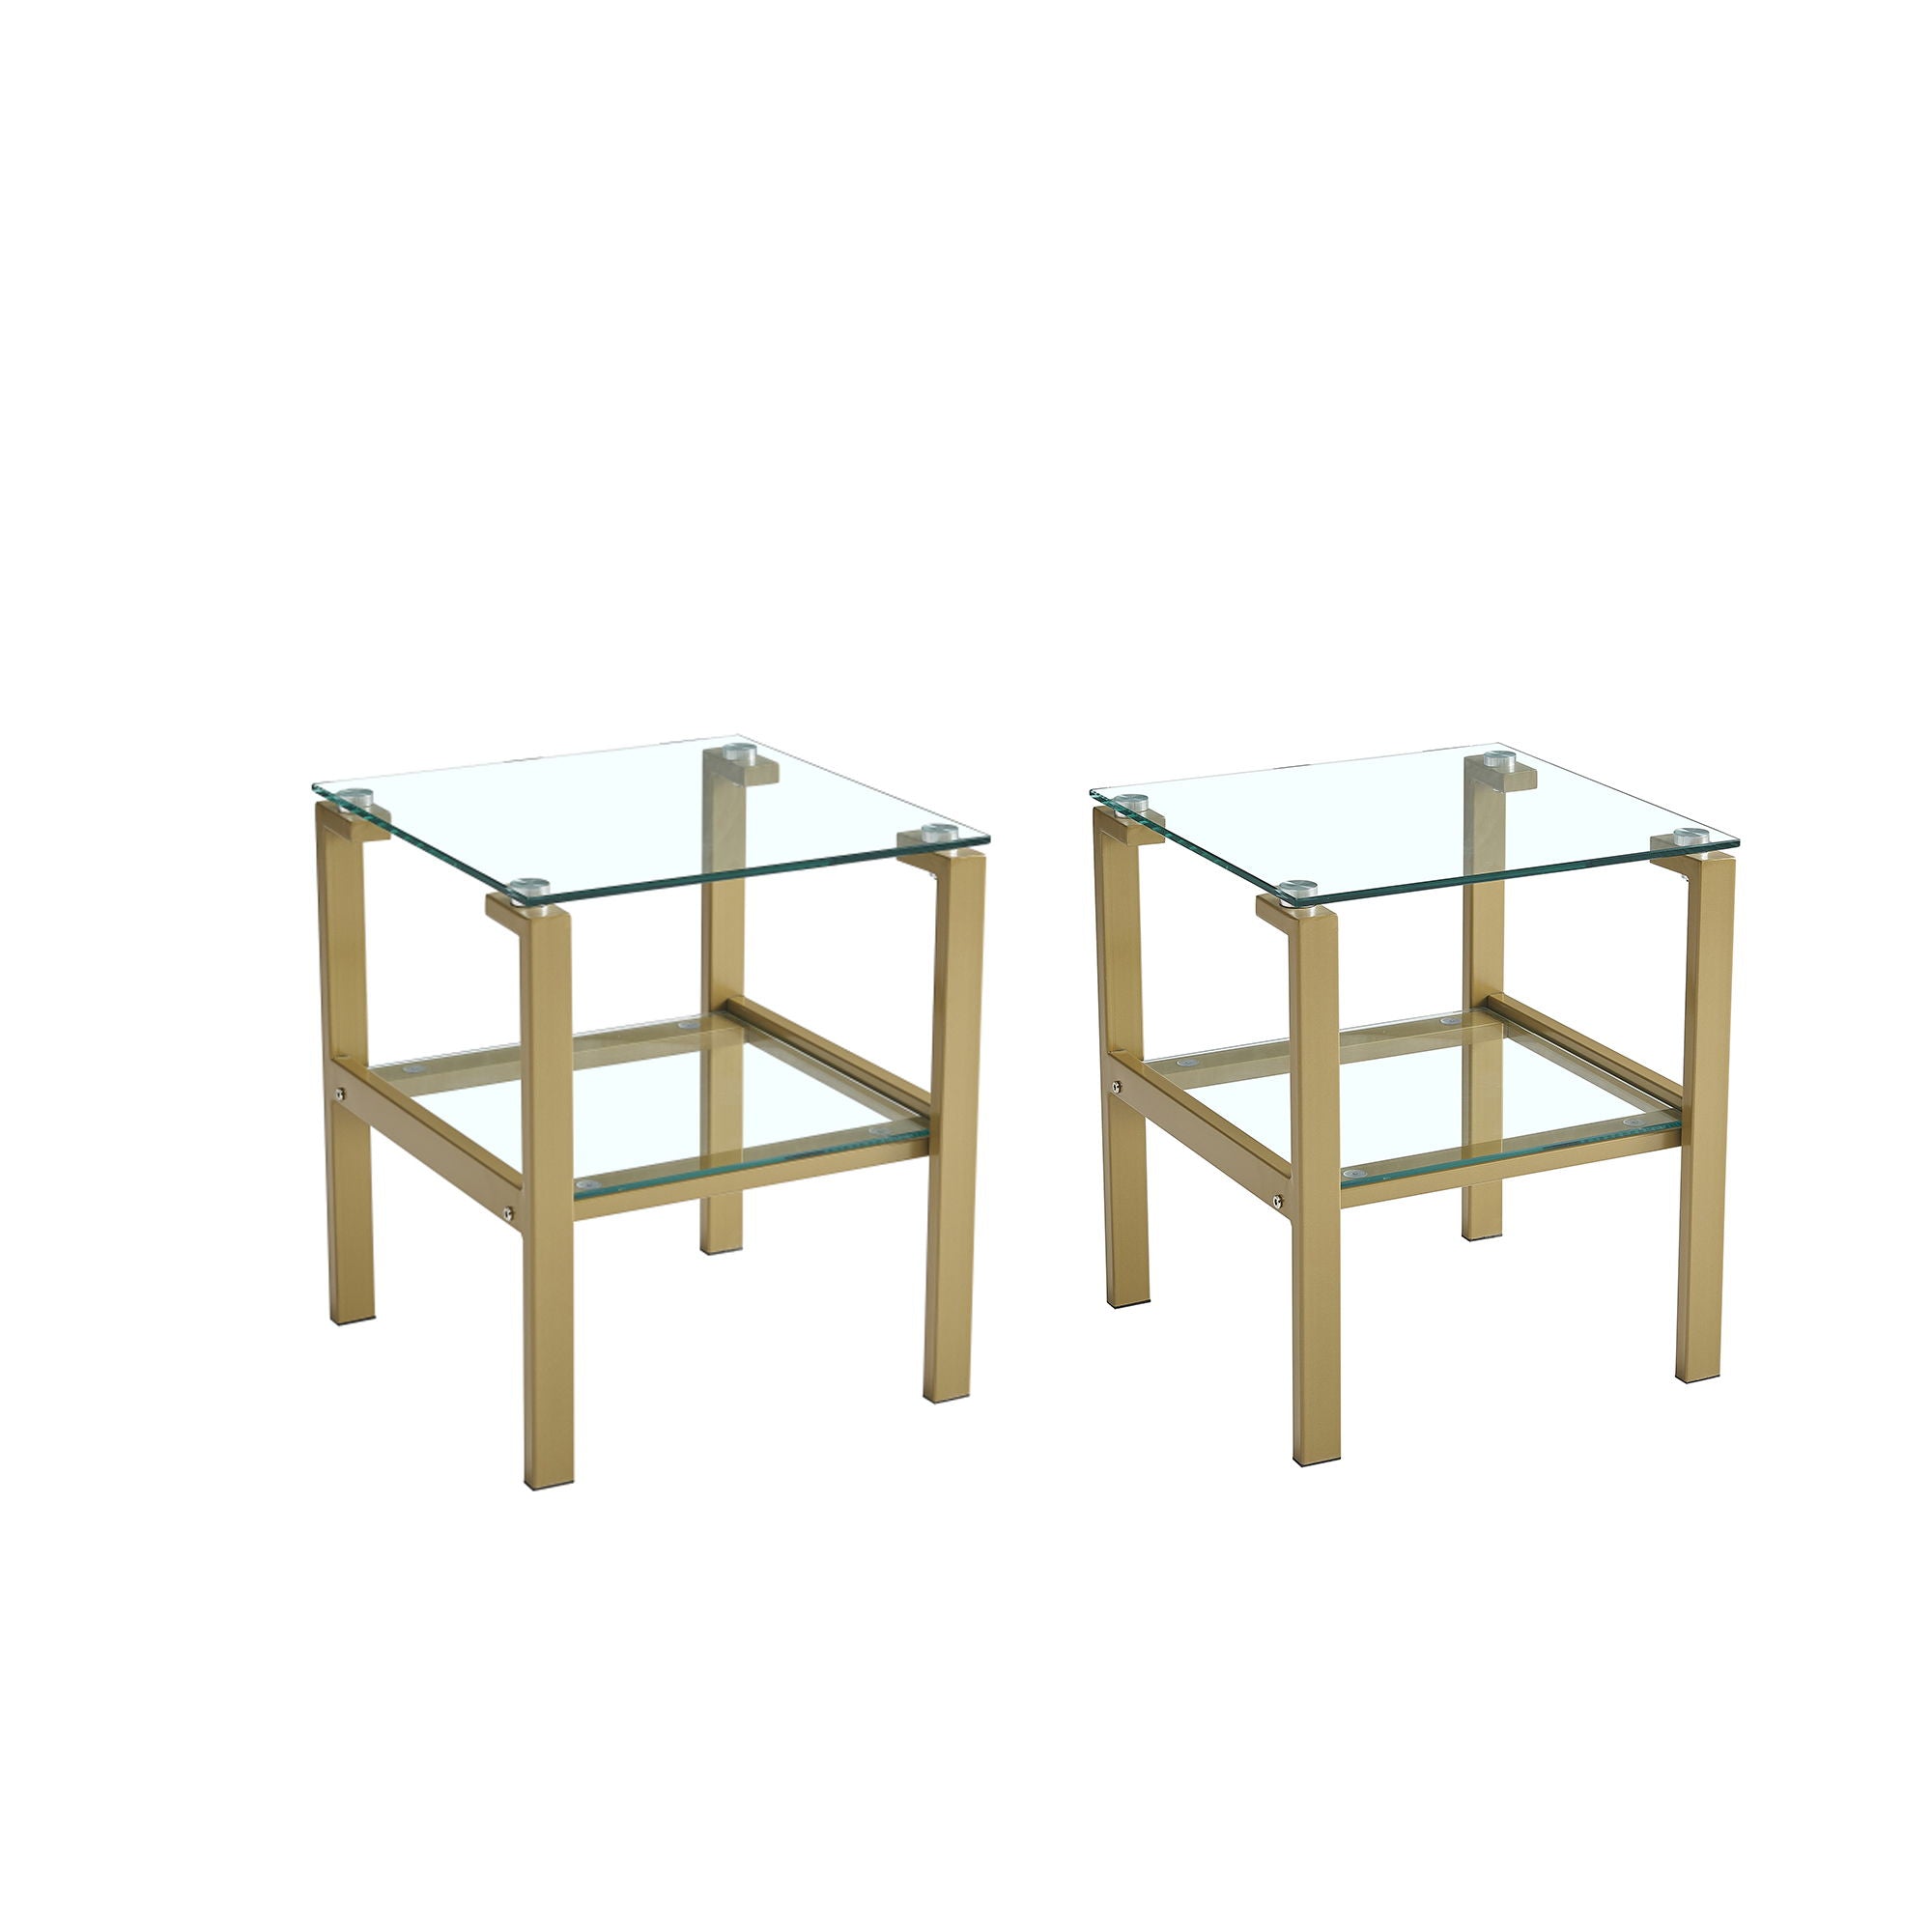 (Set of 2) Gold / Clear Glass Side & End Table With Storage Shelve, Night Stand / Sofa Table Bedroom Corner Table